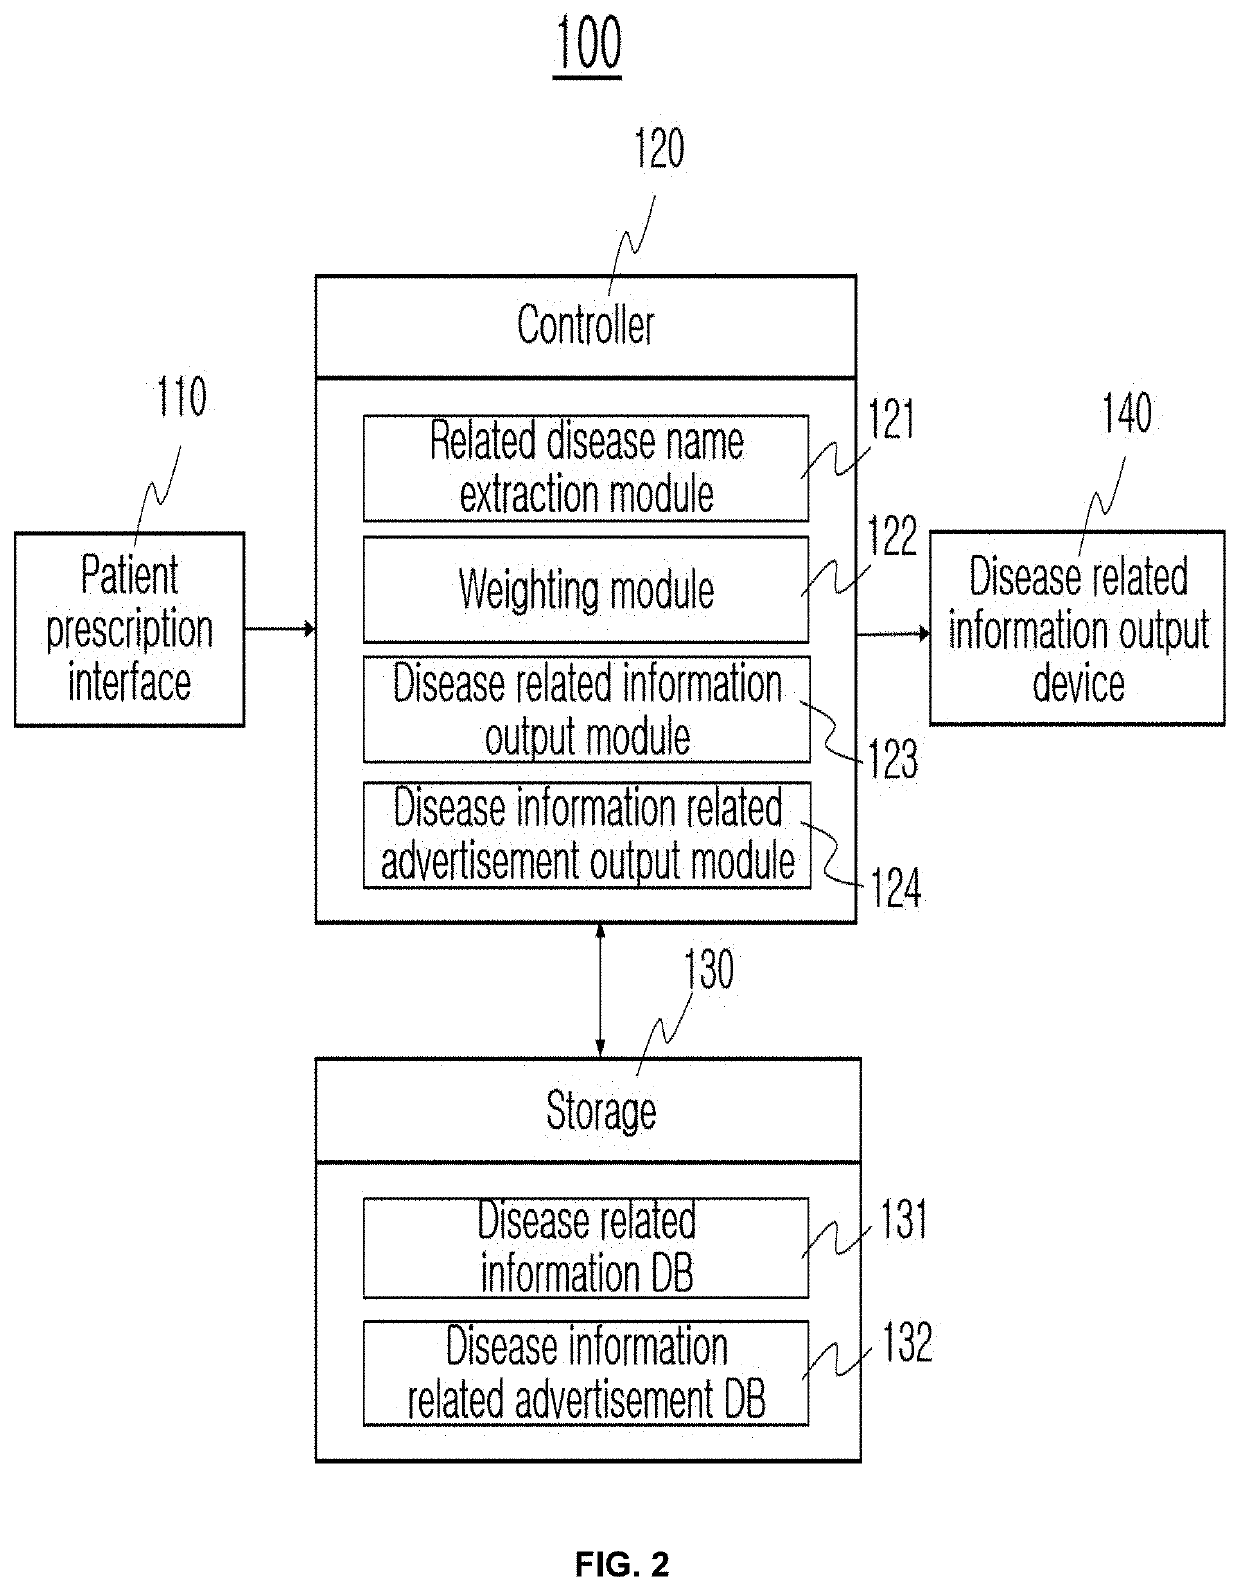 Method for extracting related disease from patient prescription and providing extracted disease related information